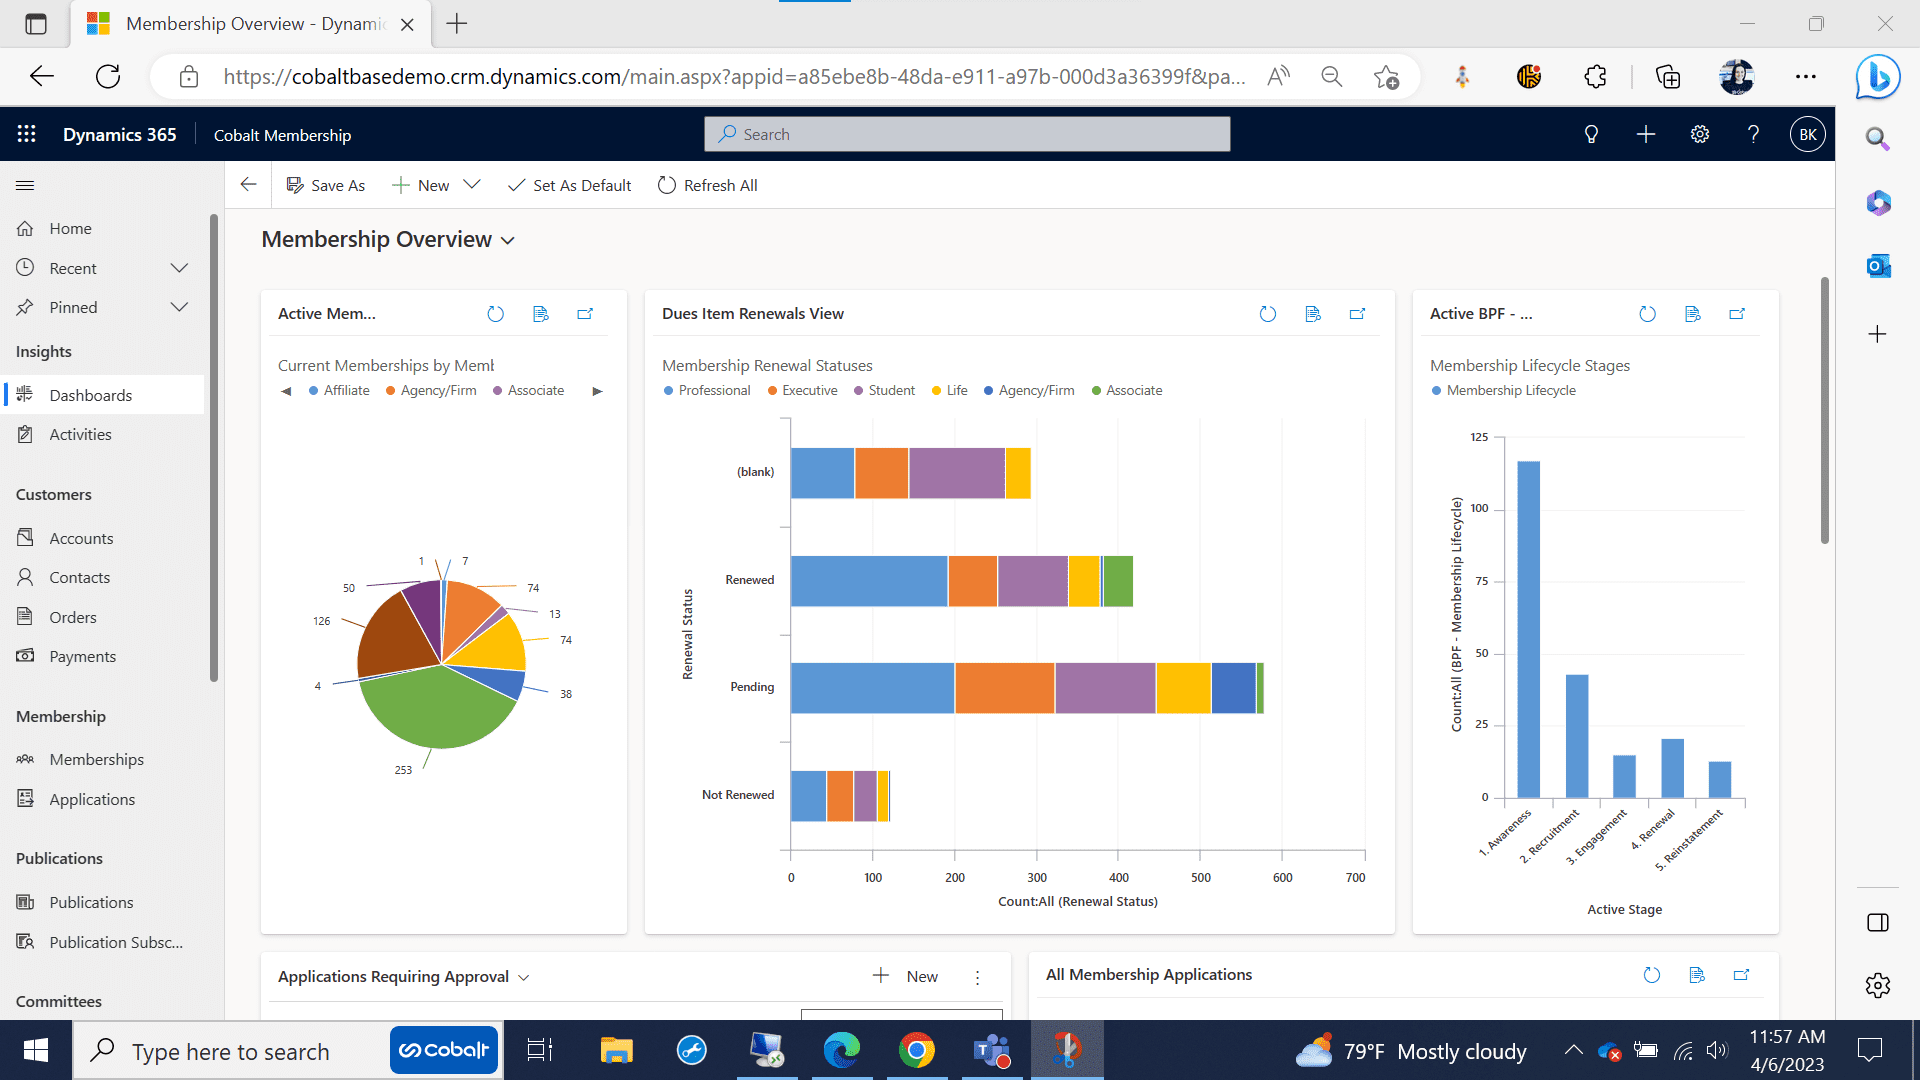 The image contains a pie graph, bar chart, and other elements of the AMS interface inside Cobalt's association software. 